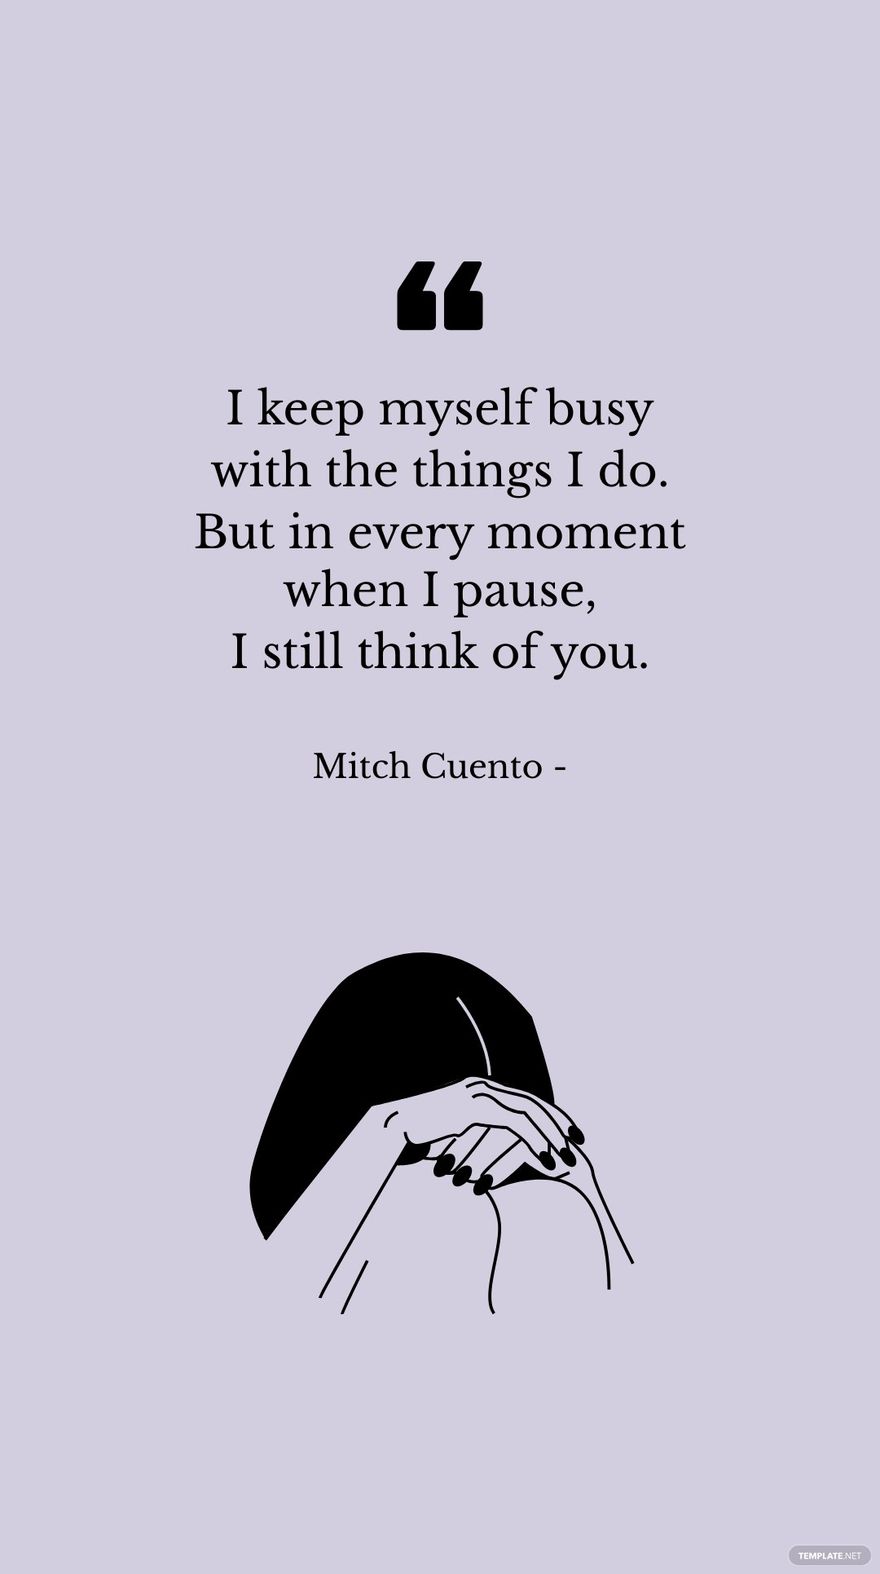 Mitch Cuento - I keep myself busy with the things I do. But in every moment when I pause, I still think of you.